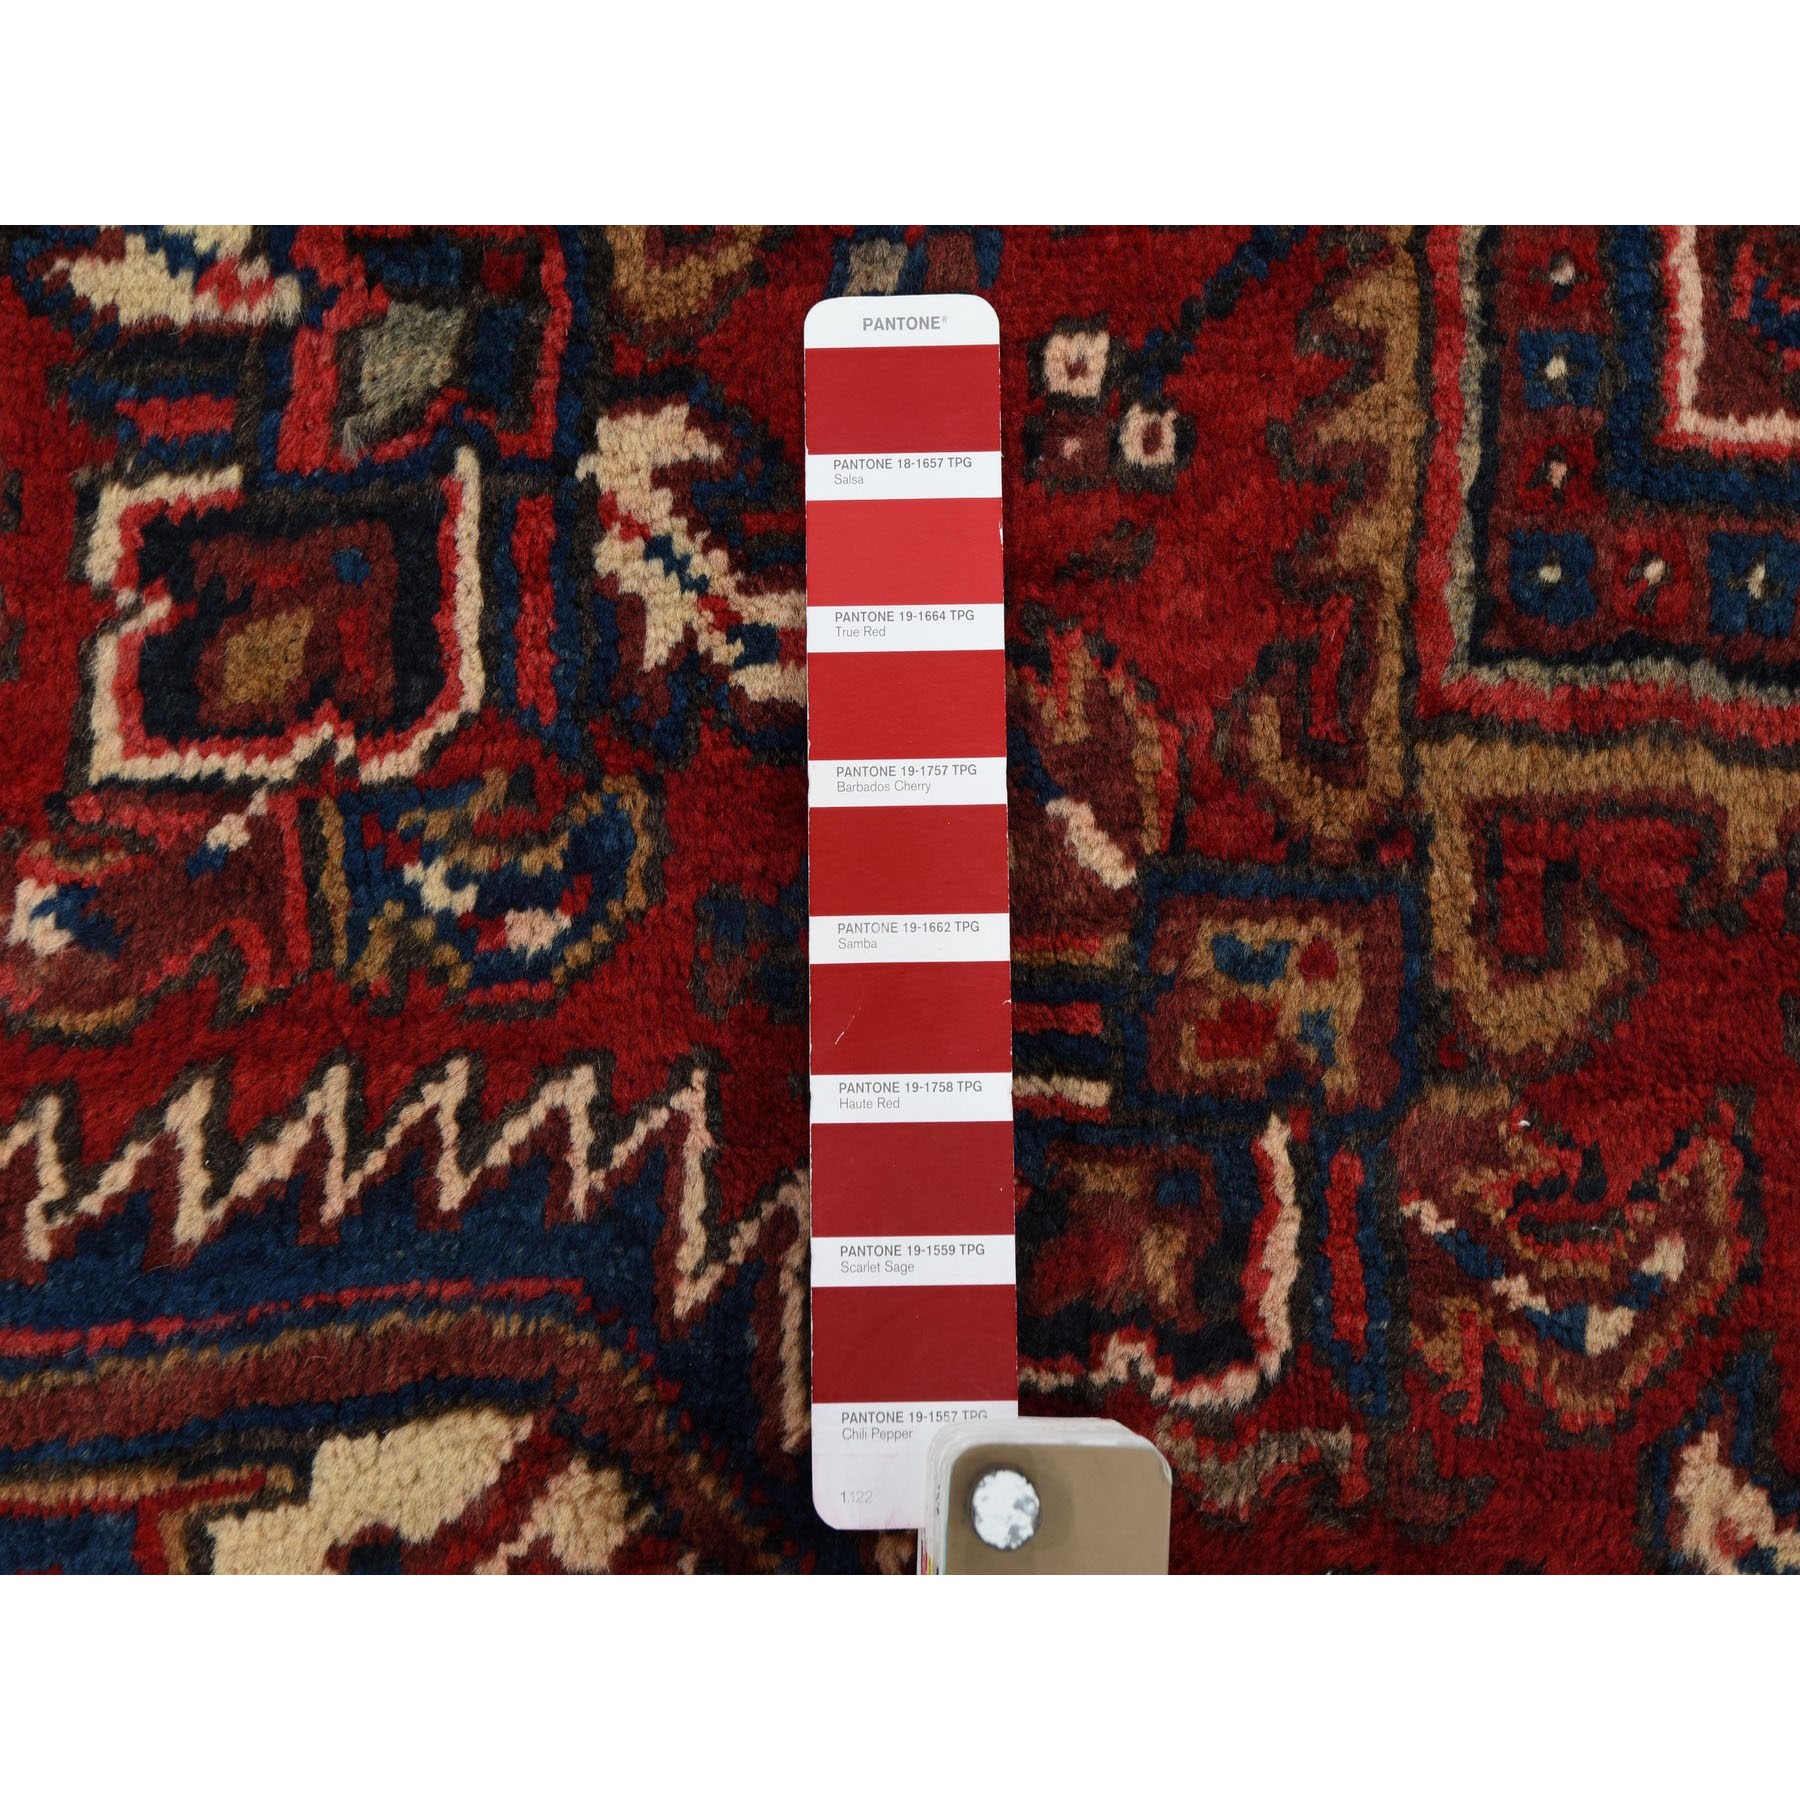 7-3 x10-4  Red Semi Antique Persian Heriz Geometric Design Thick and Plush Hand Knotted Oriental Rug 